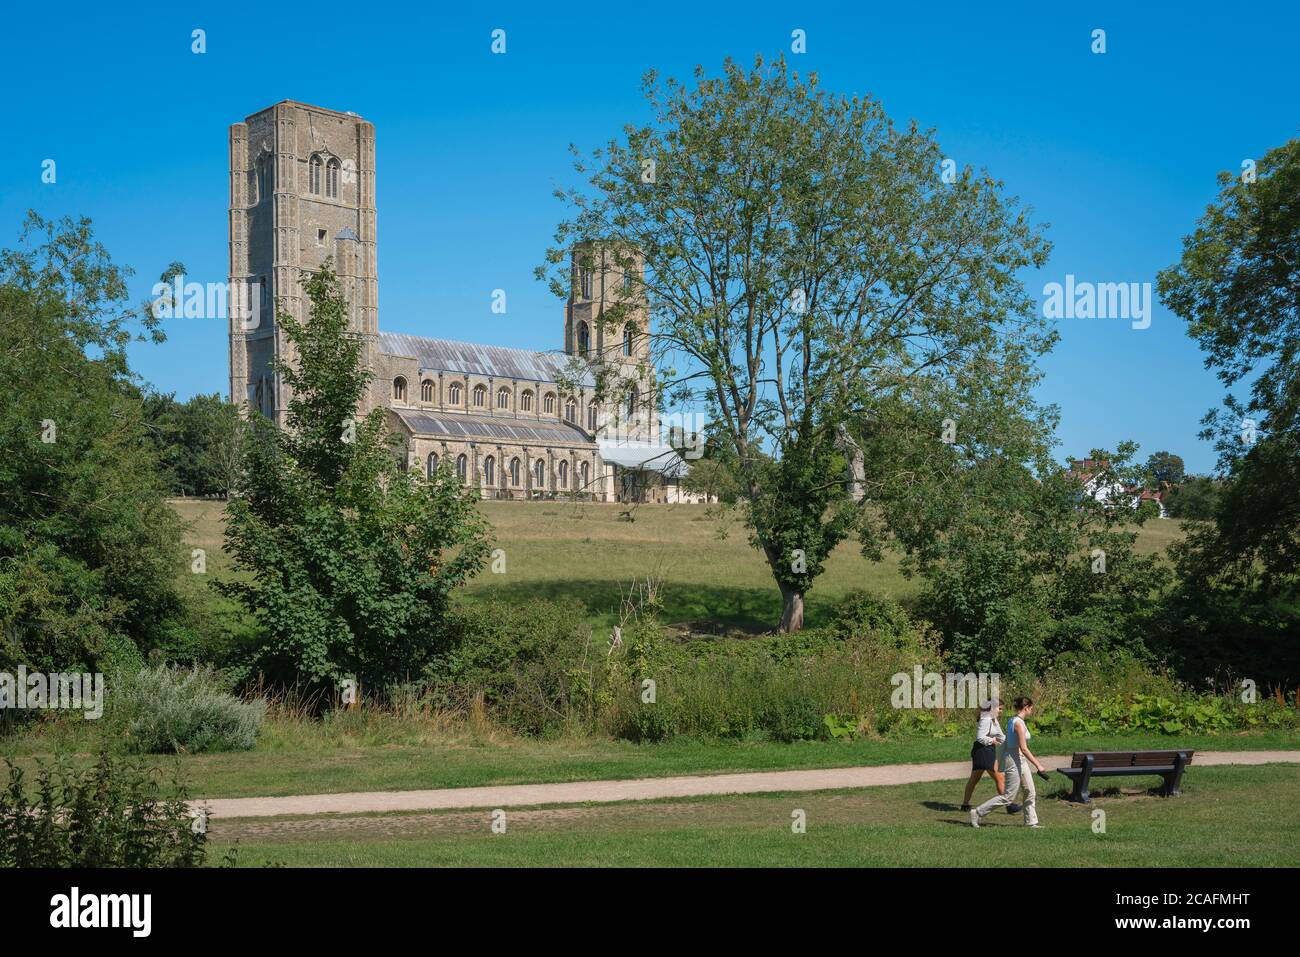 UK countryside, view in summer of the 15th century Abbey building in the rural Norfolk town of Wymondham, England, UK. Stock Photo